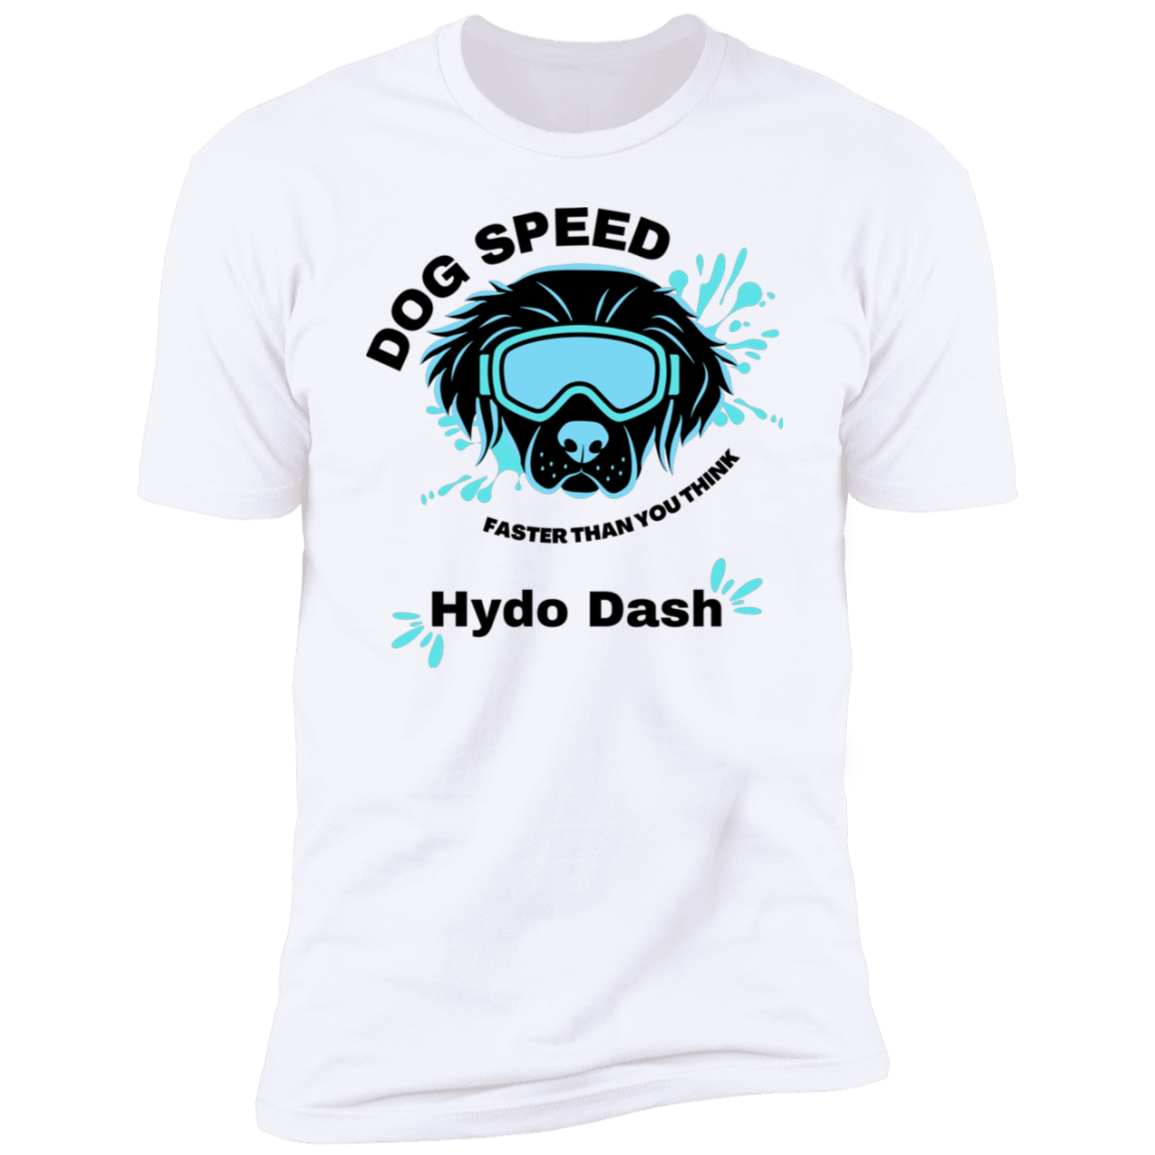 Dog Speed Faster Than You Think Hydro Dash T-shirt, Hydro Dash shirt dog shirt for humans, in white